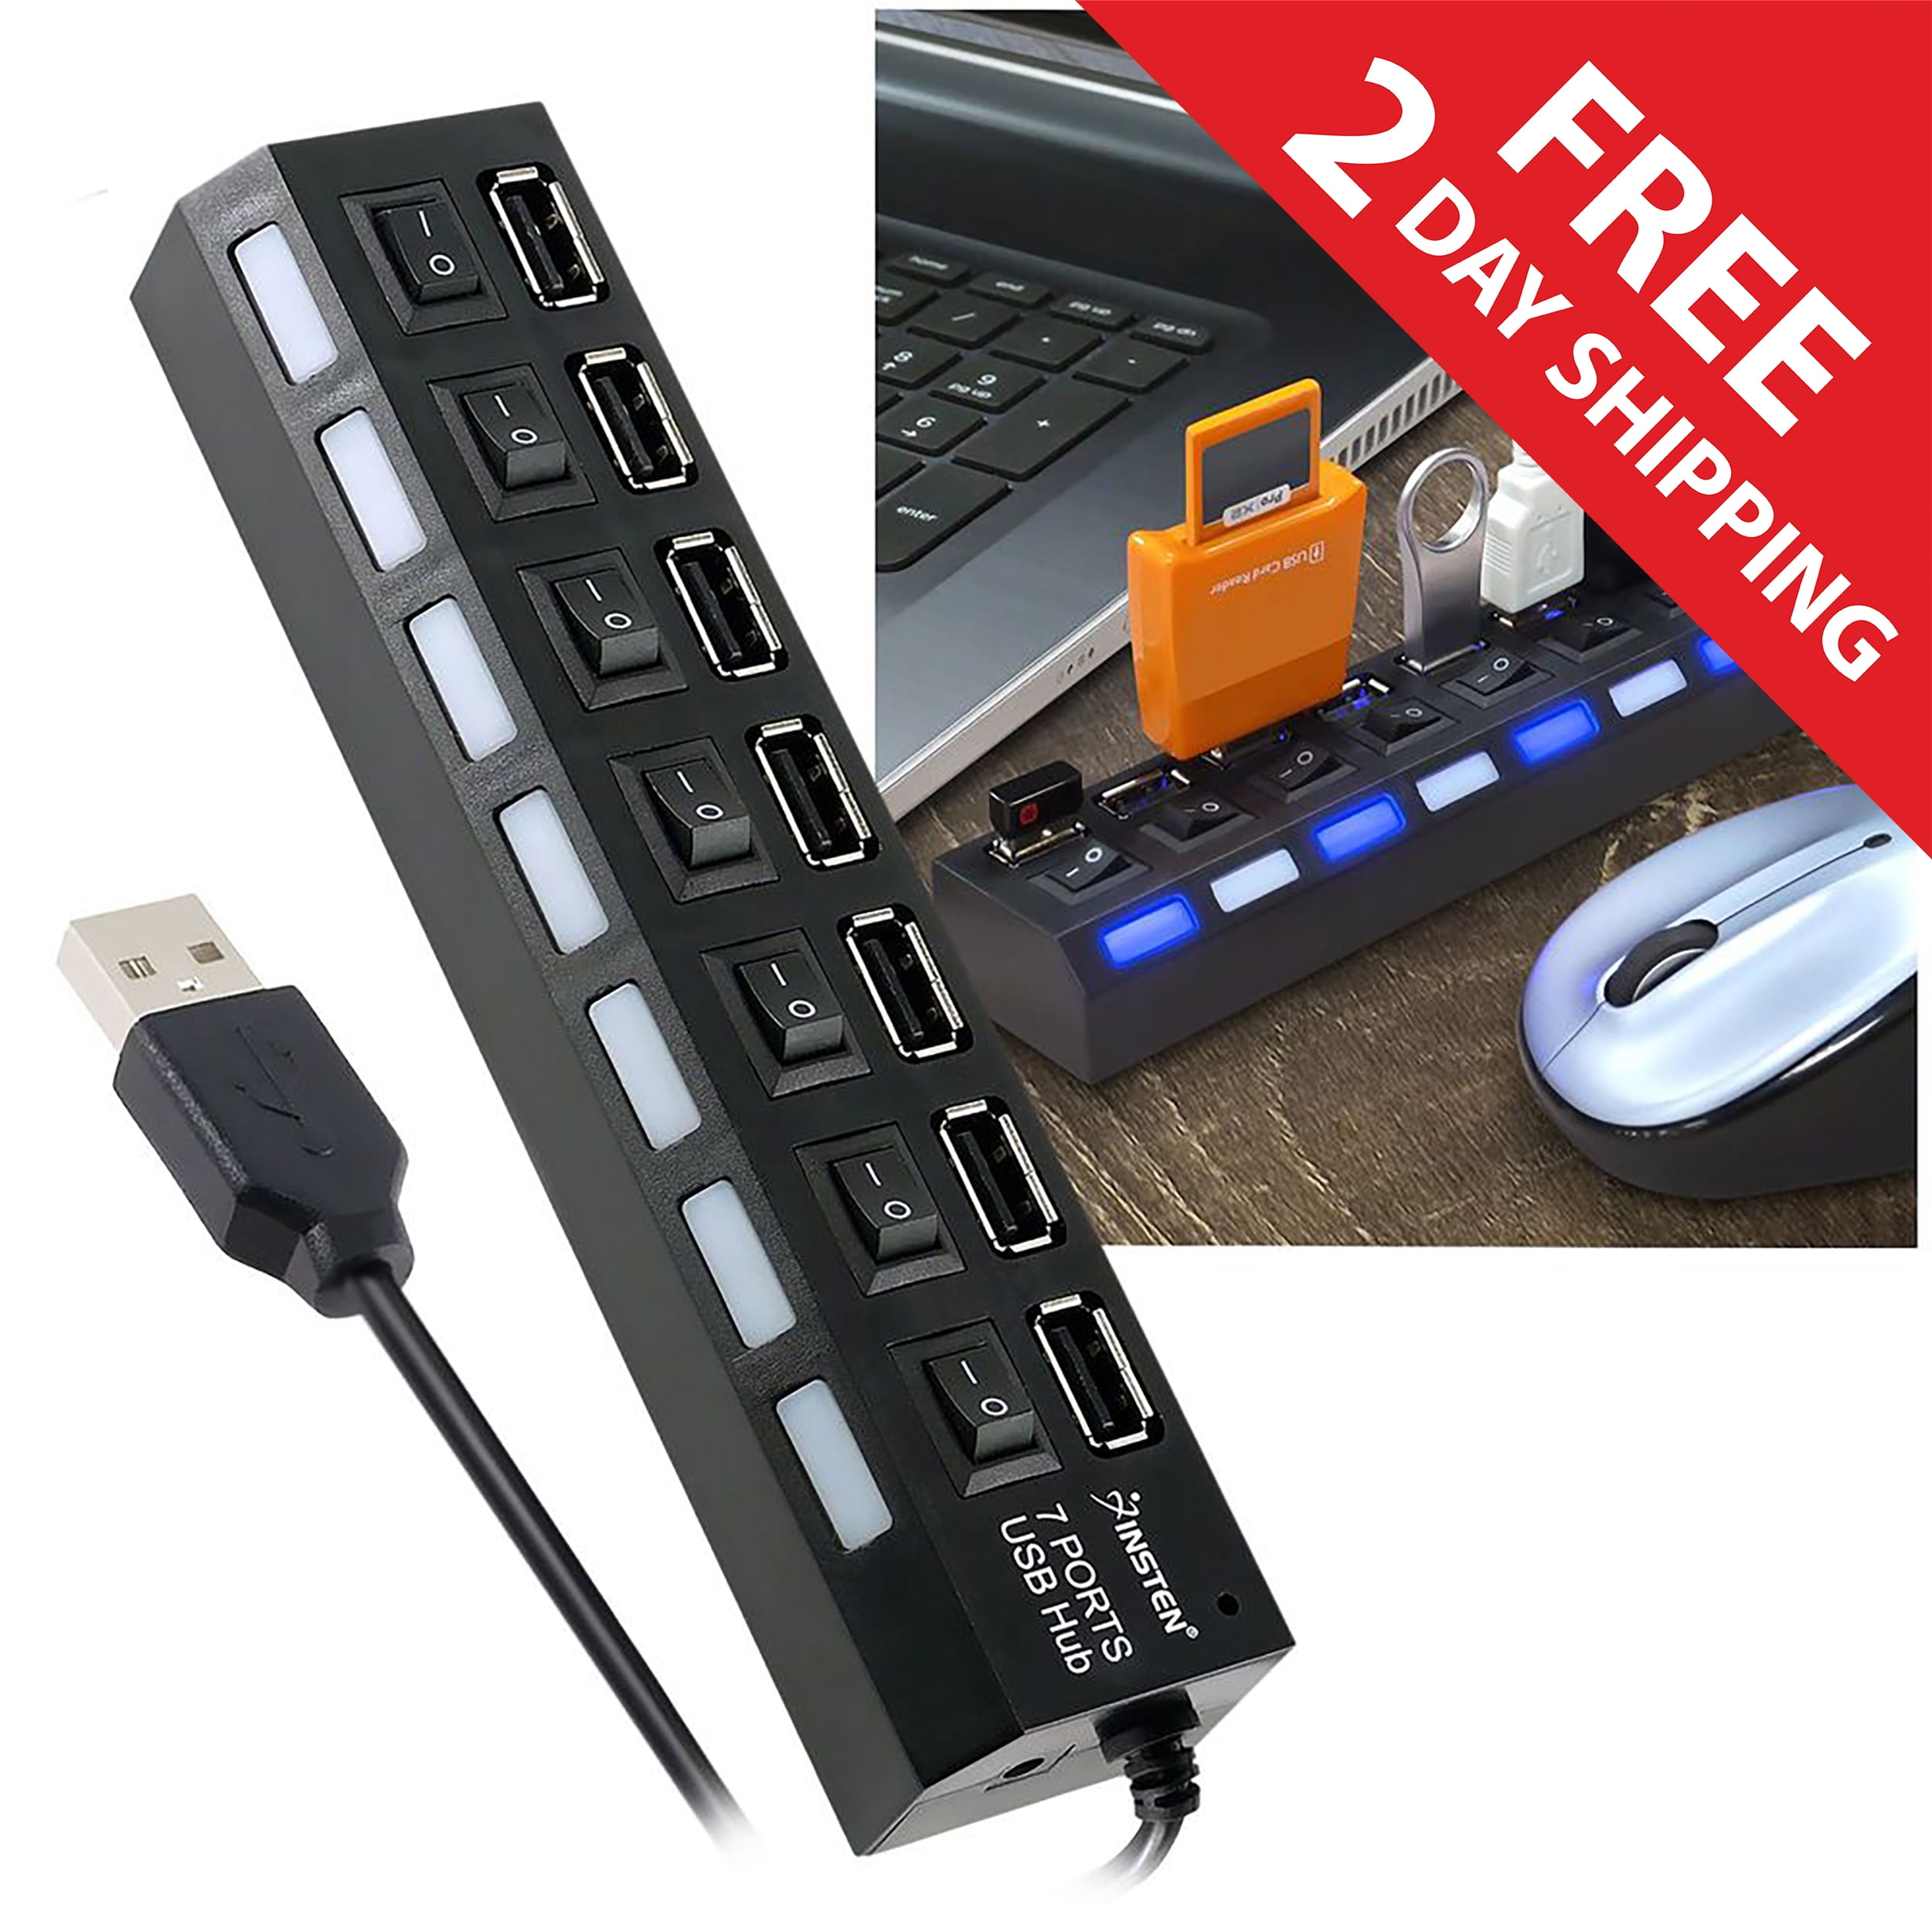 7 Ports LED USB Adapter Hub Power on/Off Switch for PC Laptop Hubs kouye 